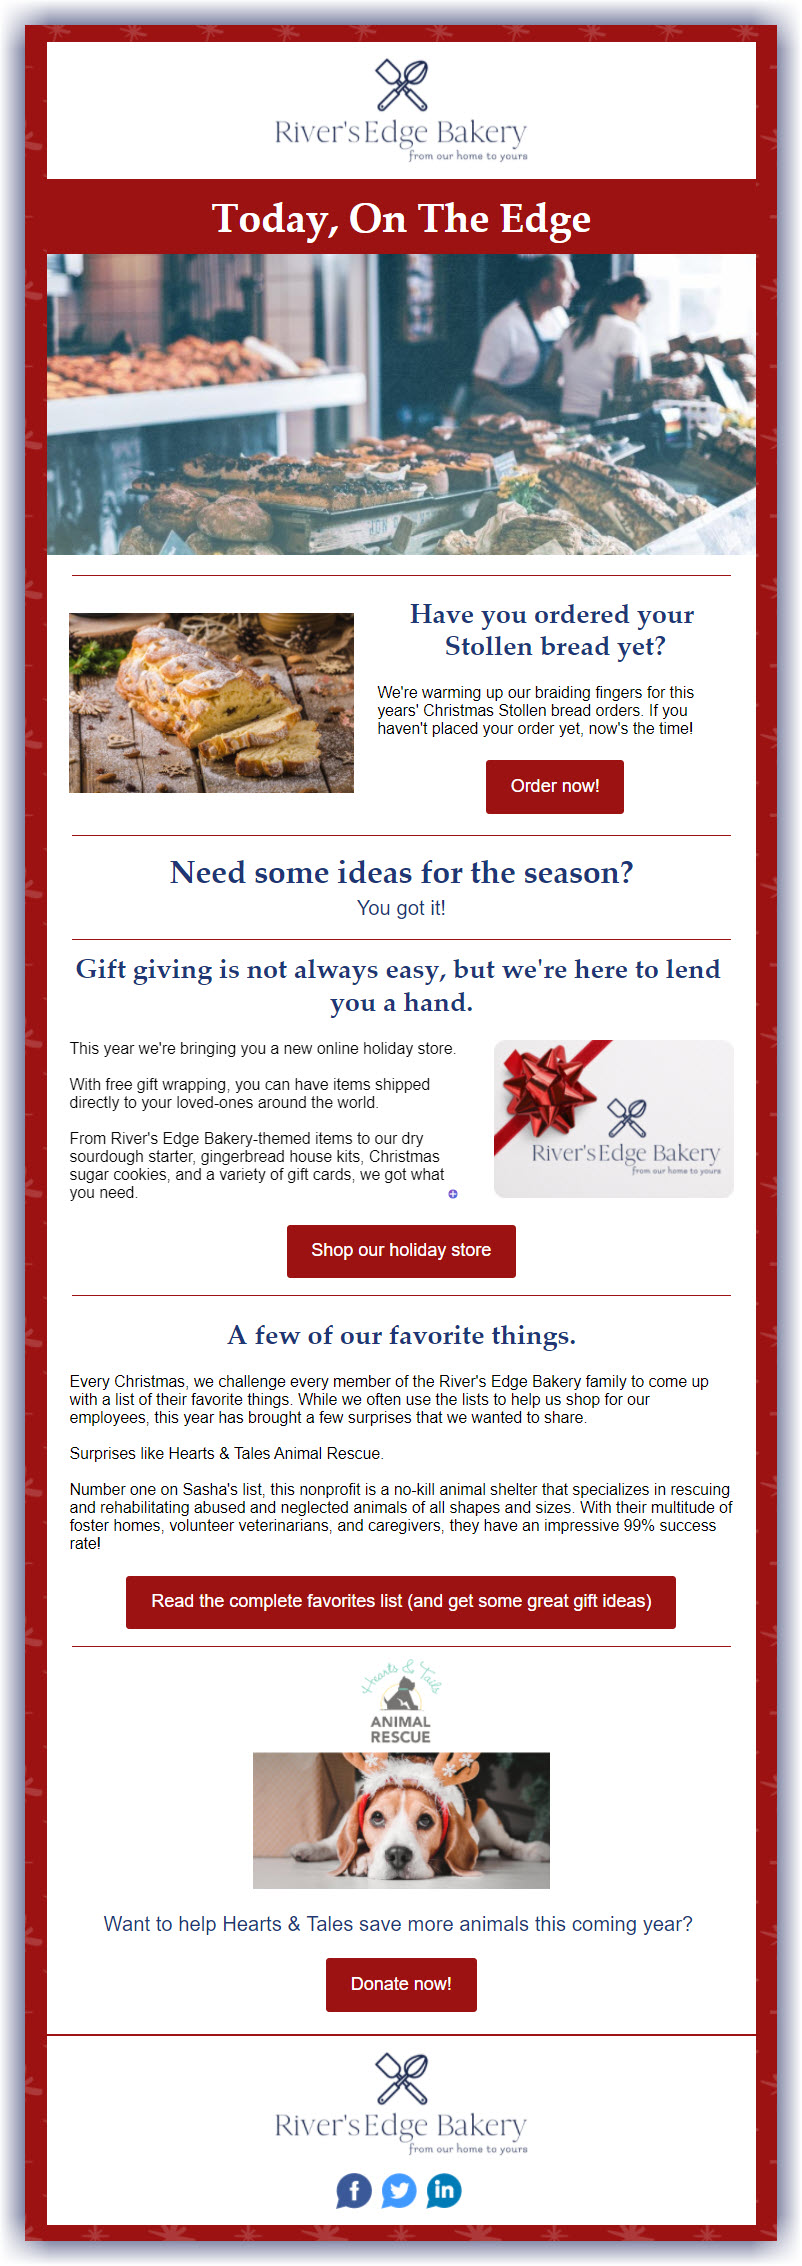 Example of simple, branded Christmas email decorations using a brand complimentary red and holiday imagery